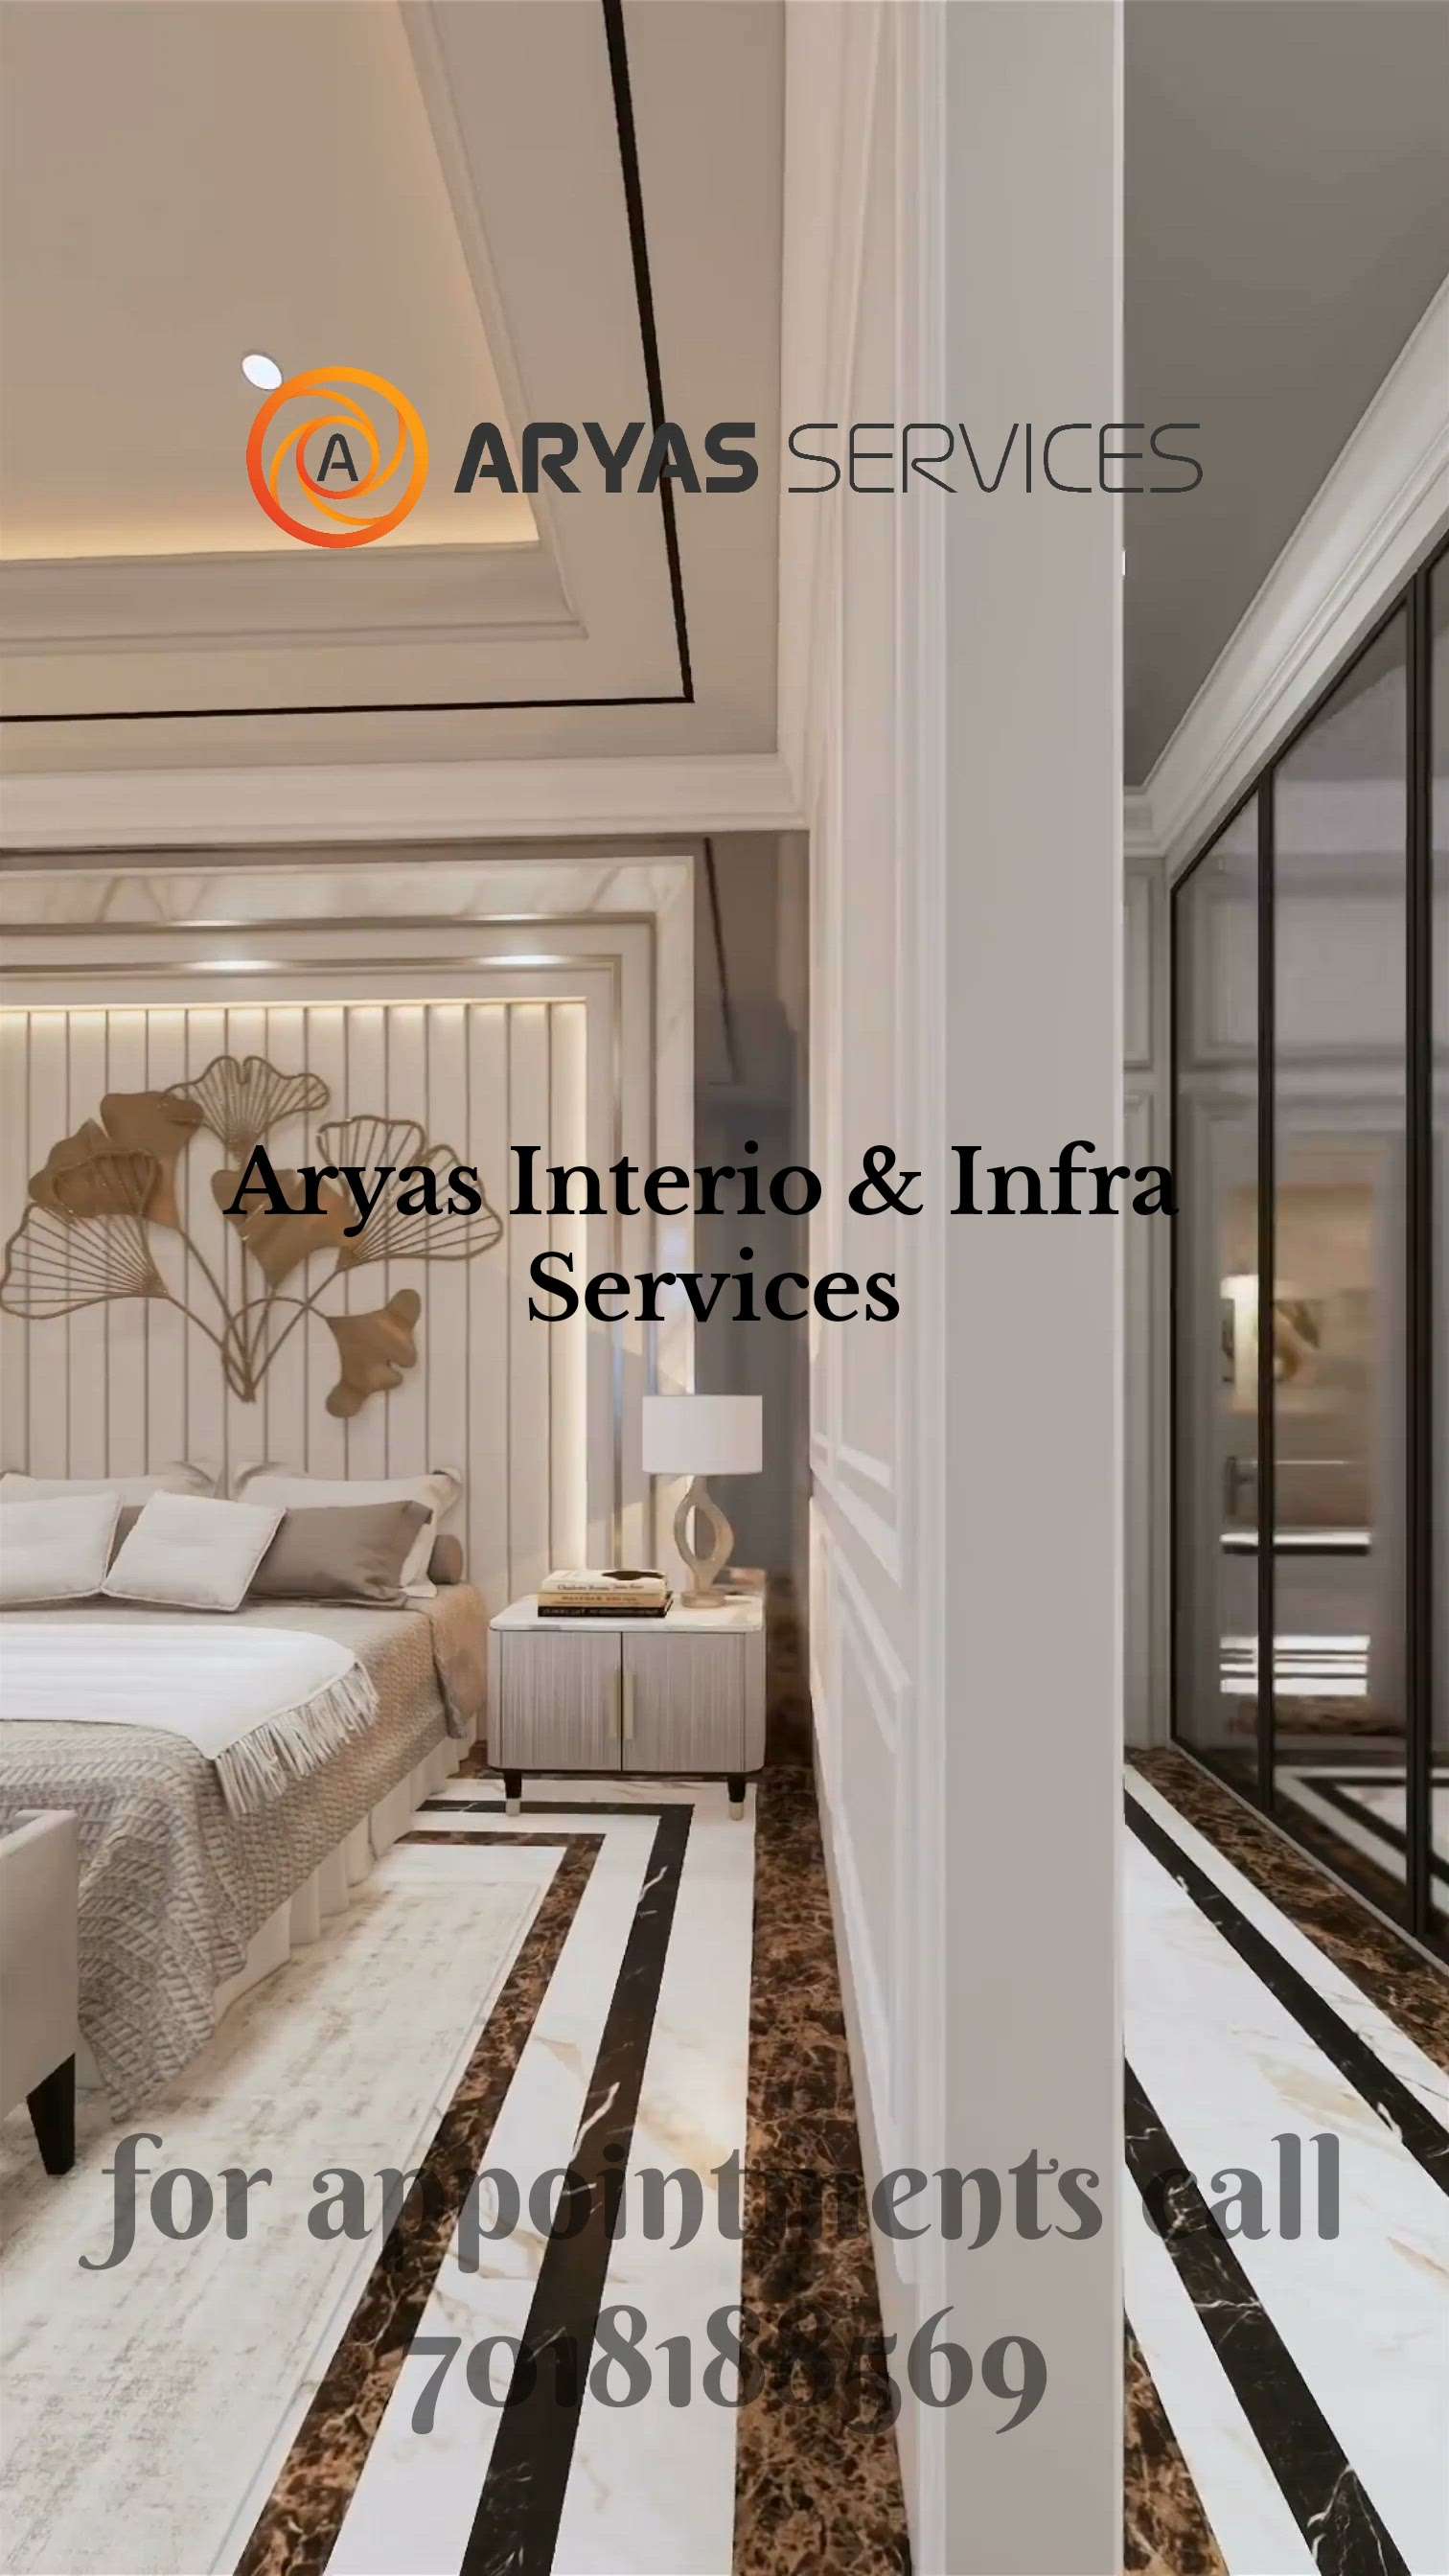 Premium and luxury best interior designer Delhi NCR 2024
Aryas interio and infra services
*_BEST INTERIOR, RENOVATION, MAINTENANCE & CONSTRUCTION WORK EXPERTS DELHI NCR_*

Greetings from Aryas Interio & Infra Services

Many  years of field experience in executing all types of maintenance, interior and construction work  . 
deals with the all type of commercial office, residential flat, villas, Homes interior, construction and maintenance work.
To know more visit us at
https://designinterios.com/portfolio
for appointments call at +91-7018188569